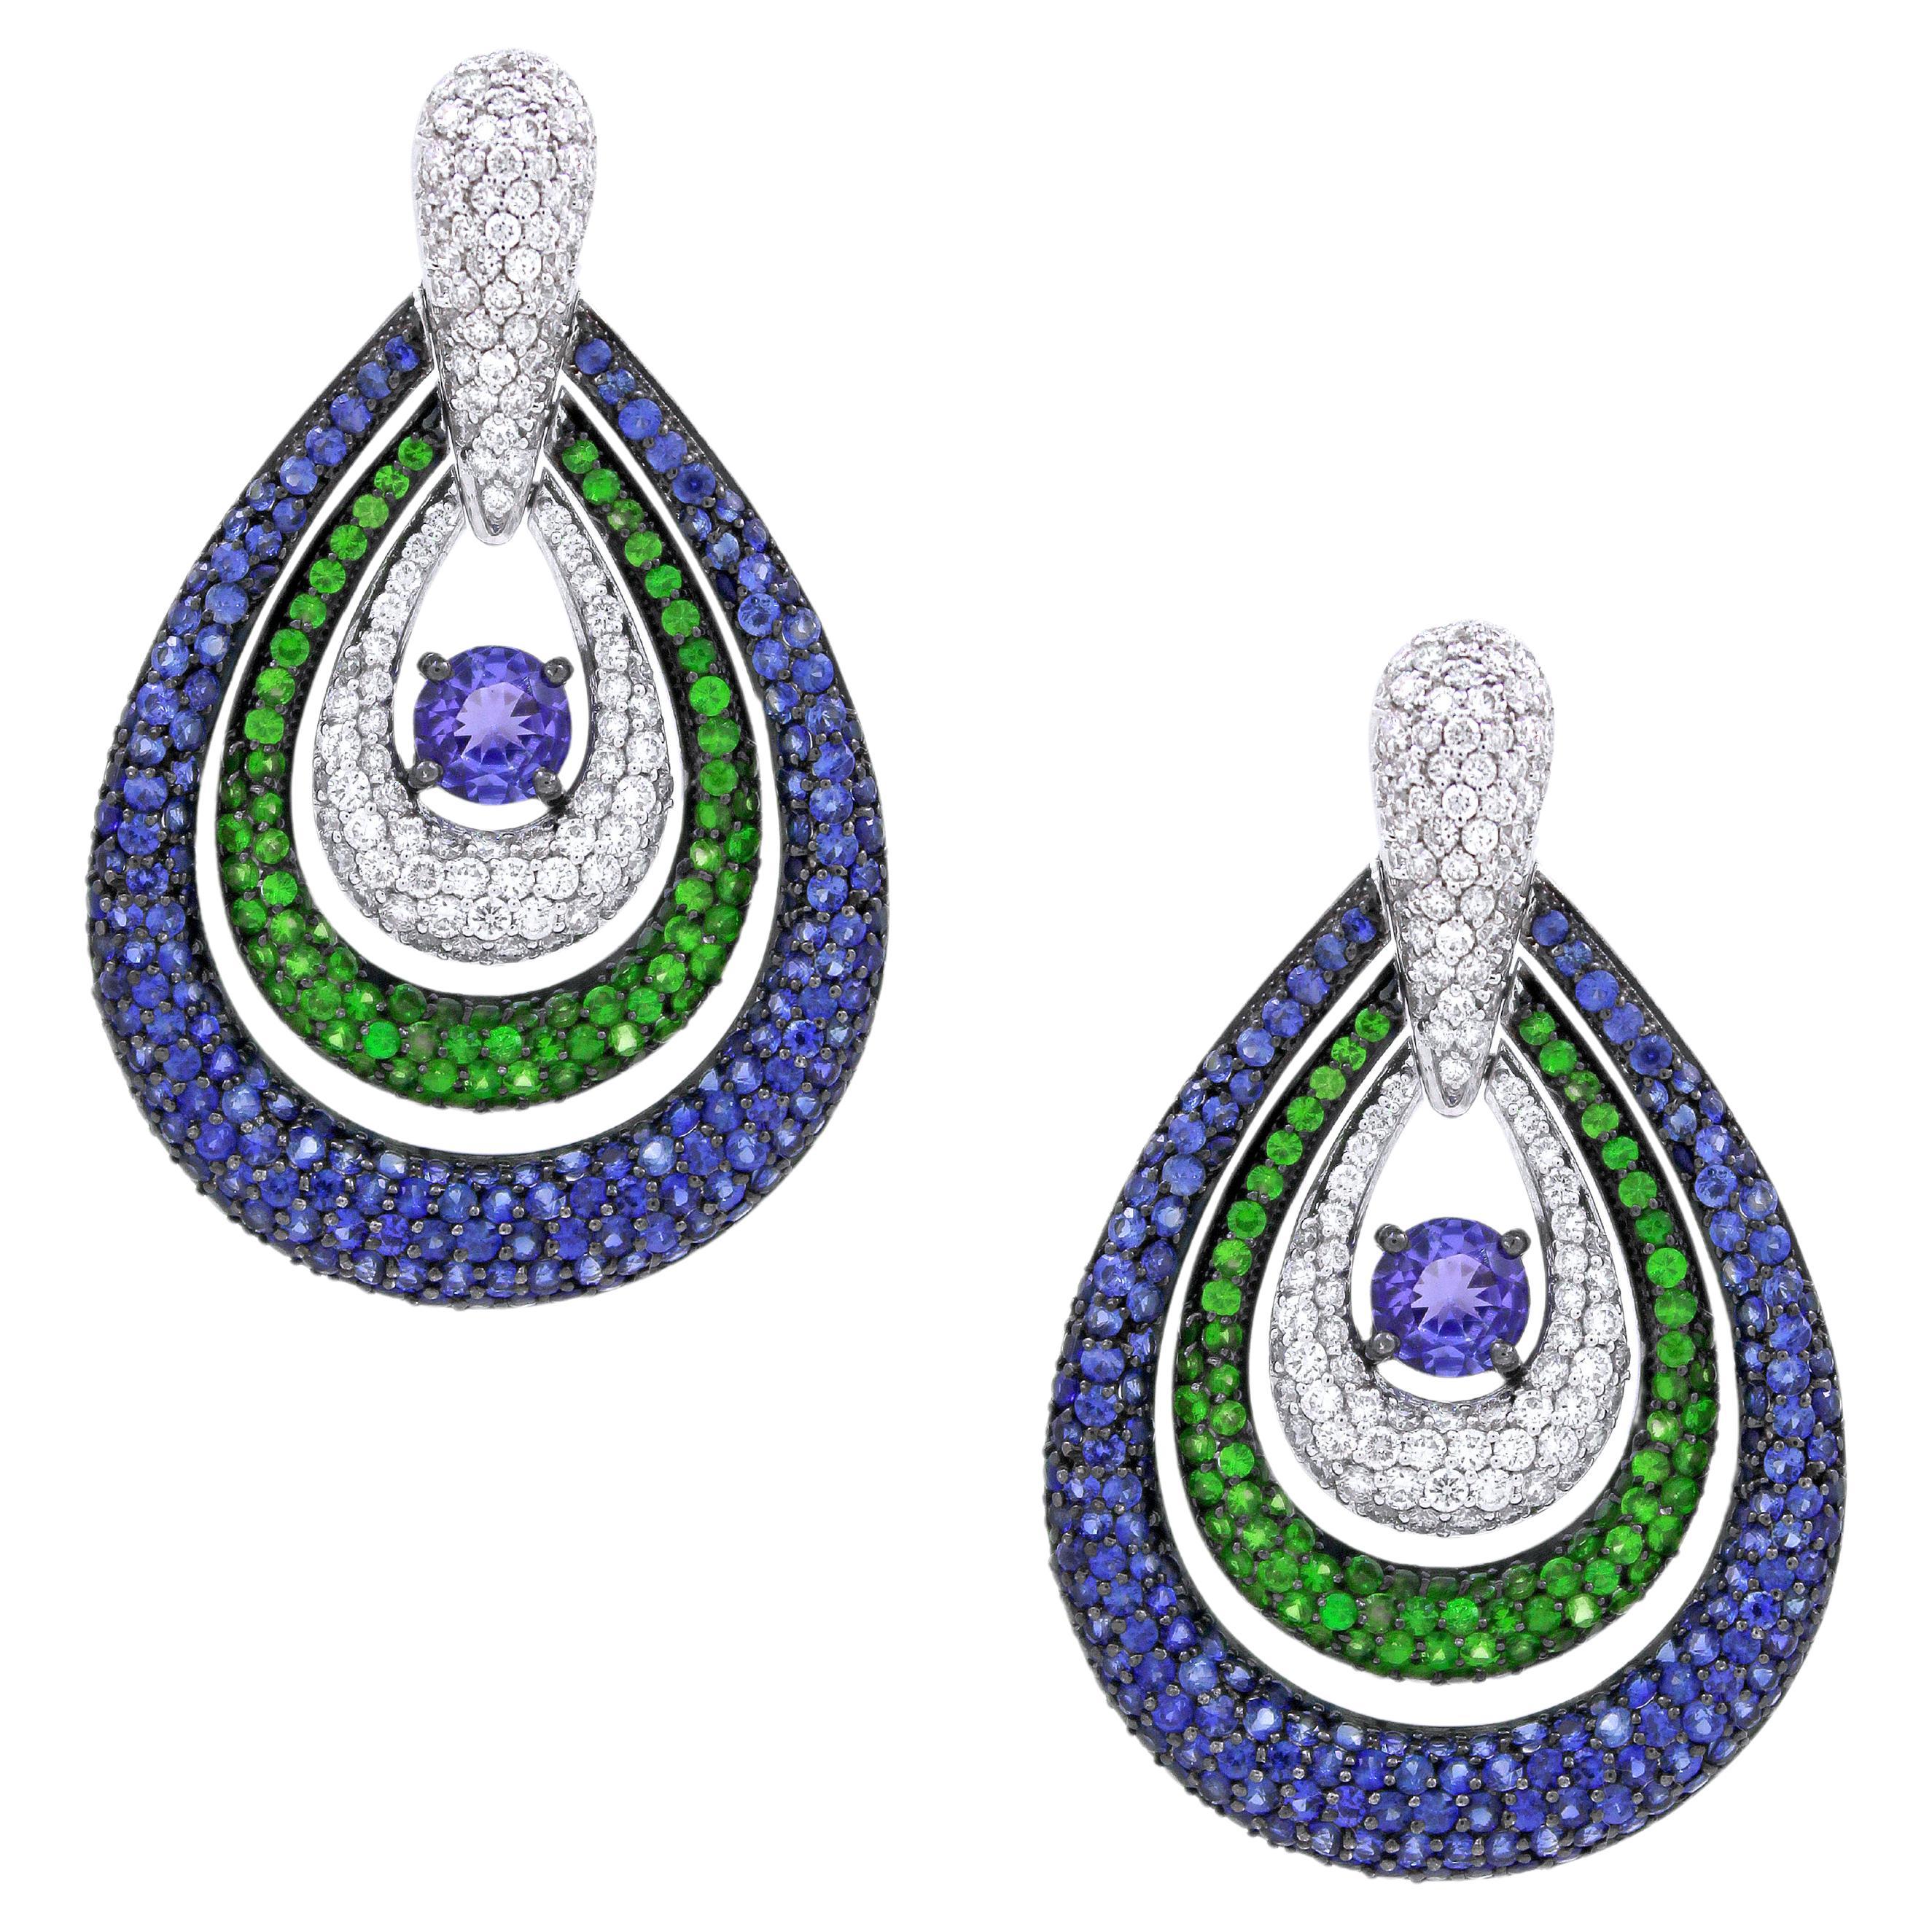 5.23 cts of Tsavorite and Blue sapphire Pear Drop Earrings